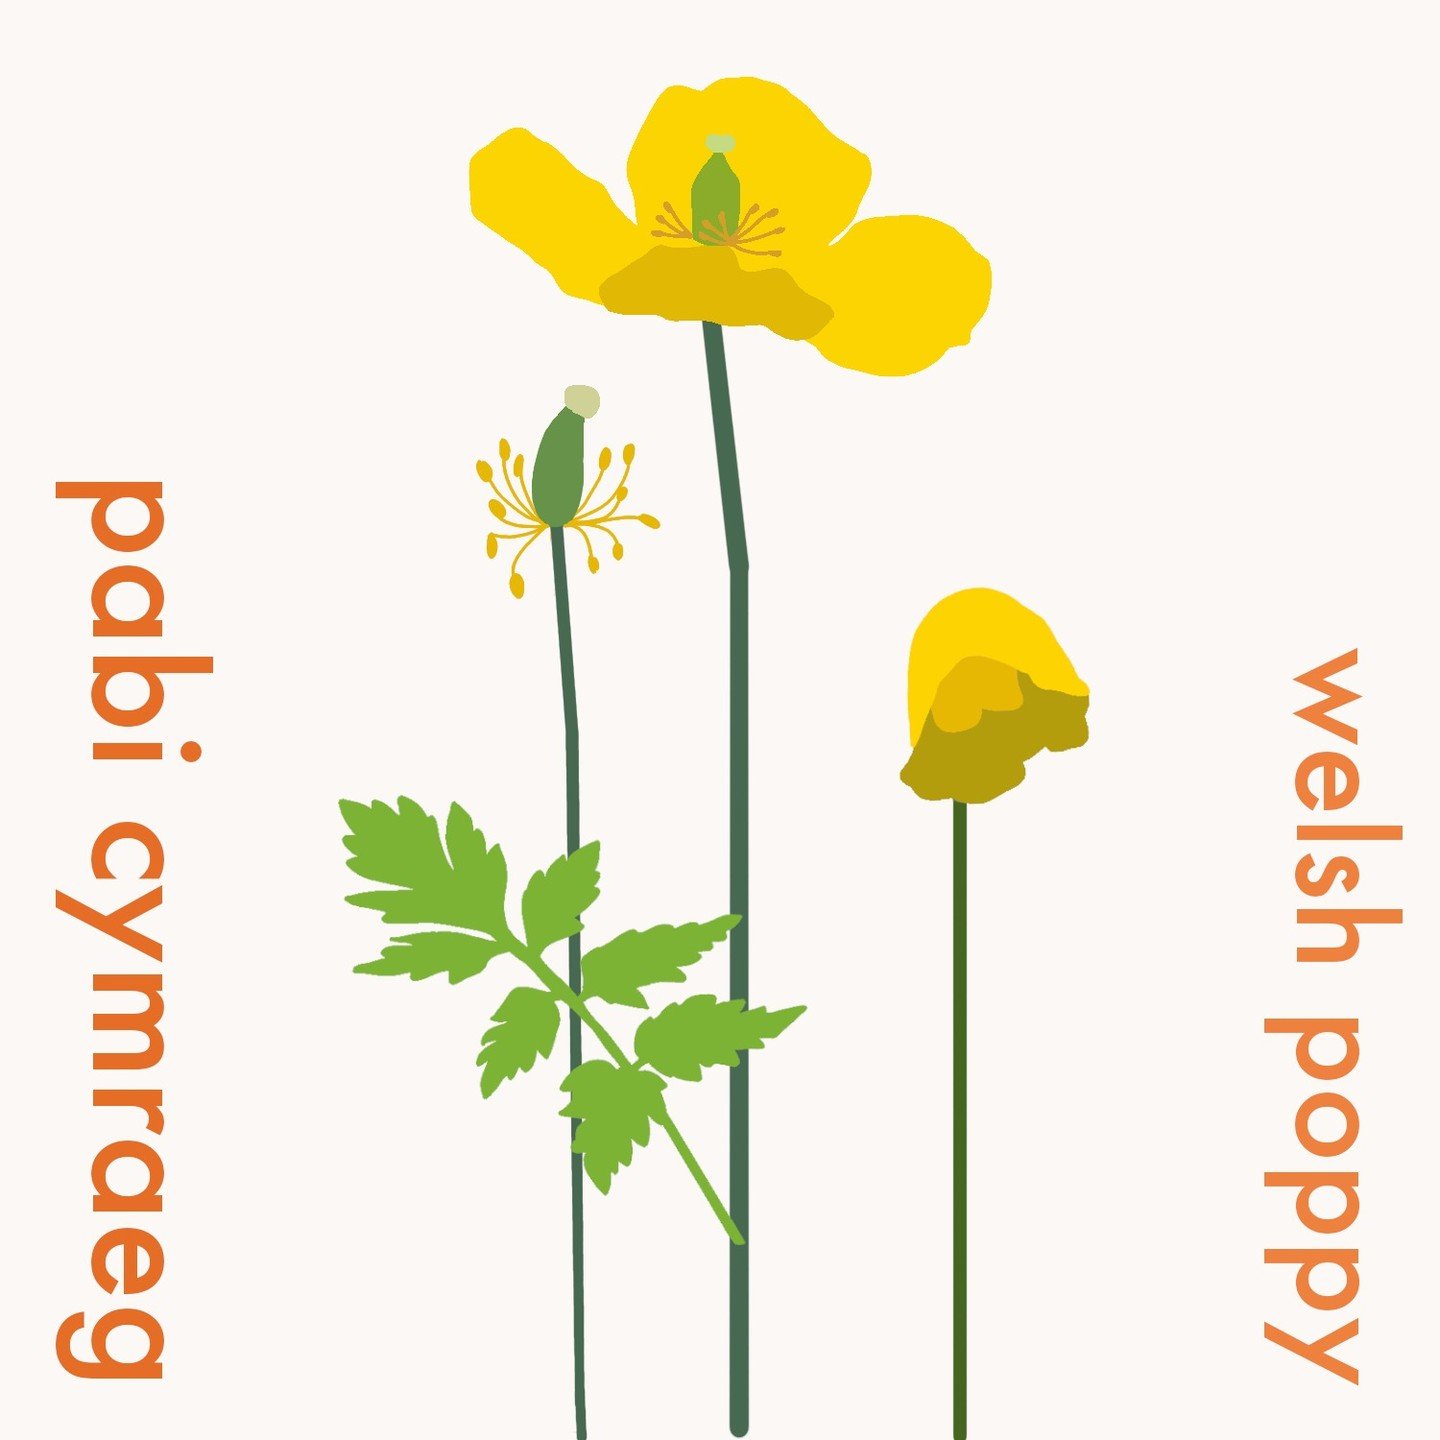 Here's the fruits if my labour today - a Welsh poppy #illustration. I'm developing the postcard range to include other plants that aren't necessarily herbs but that are important to Wales and that promote the welsh language/ plant names.

#welshpoppy